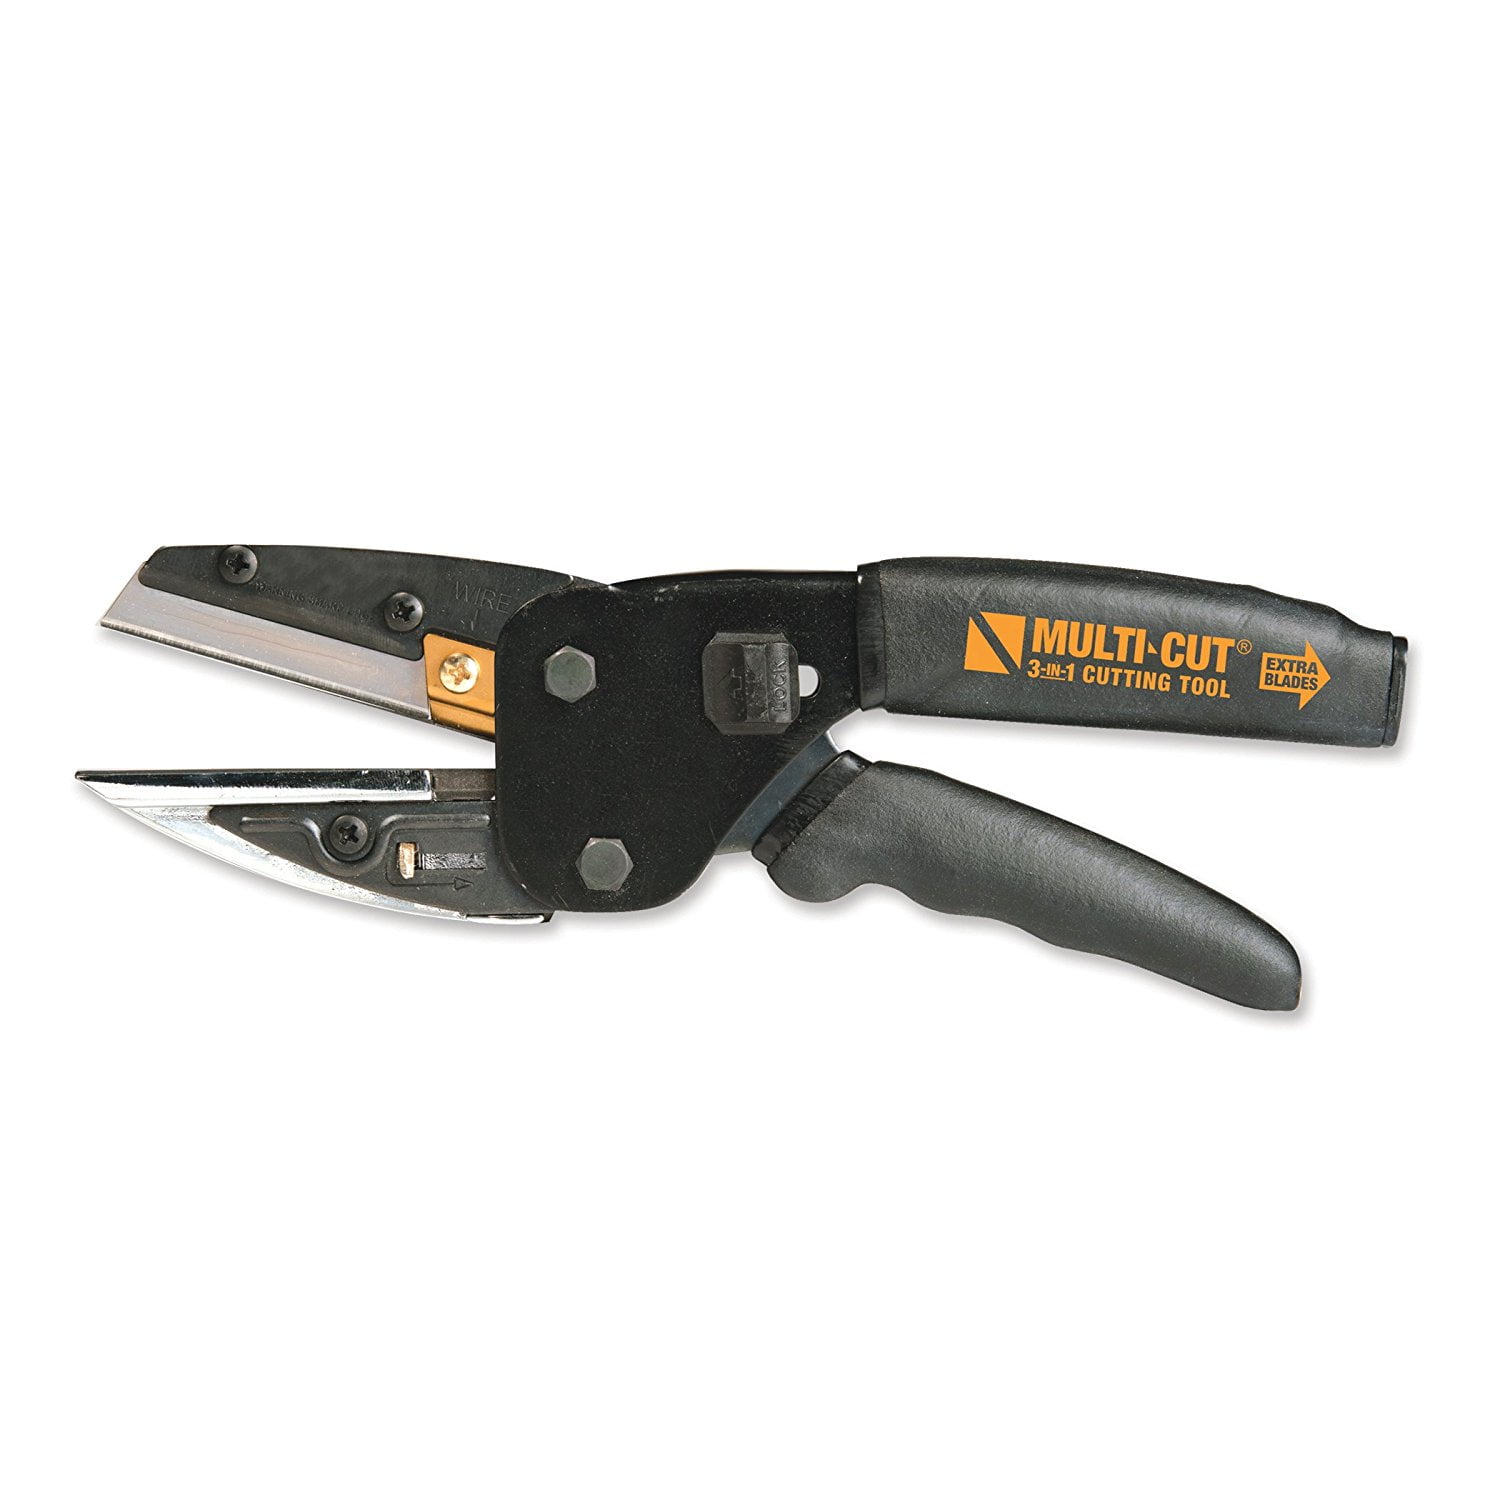 Multi-Function 3 In 1 Pliers Power Cut Cutting Tool With Built-In Wire Cutter